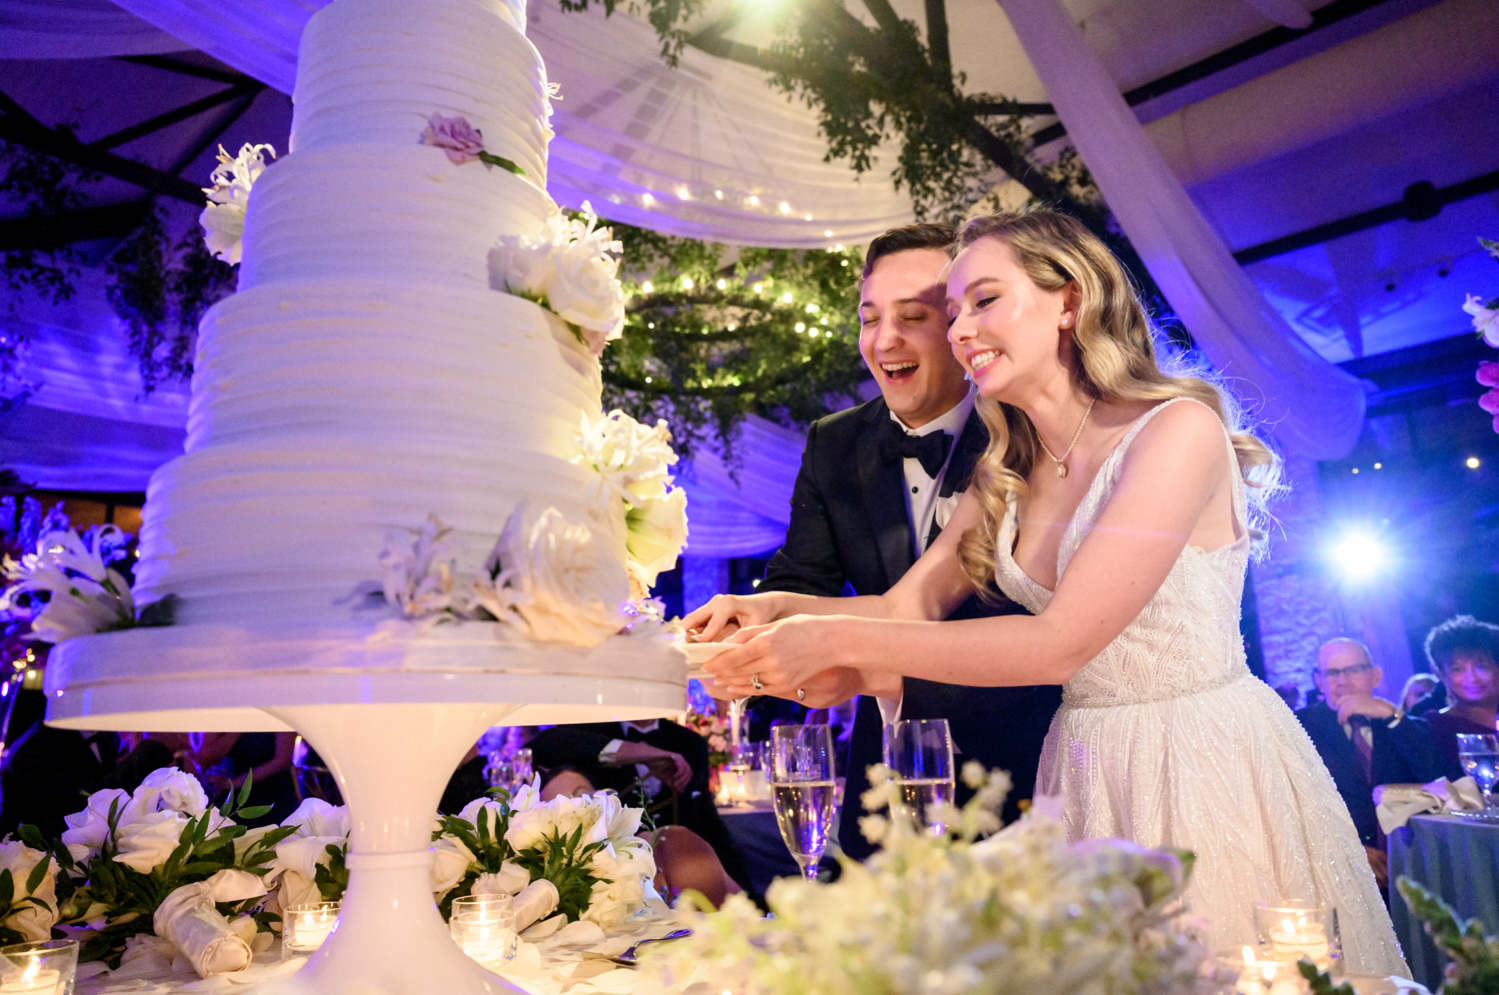 The bride and groom cut into the 5-tier wedding cake, decorated with white flowers.